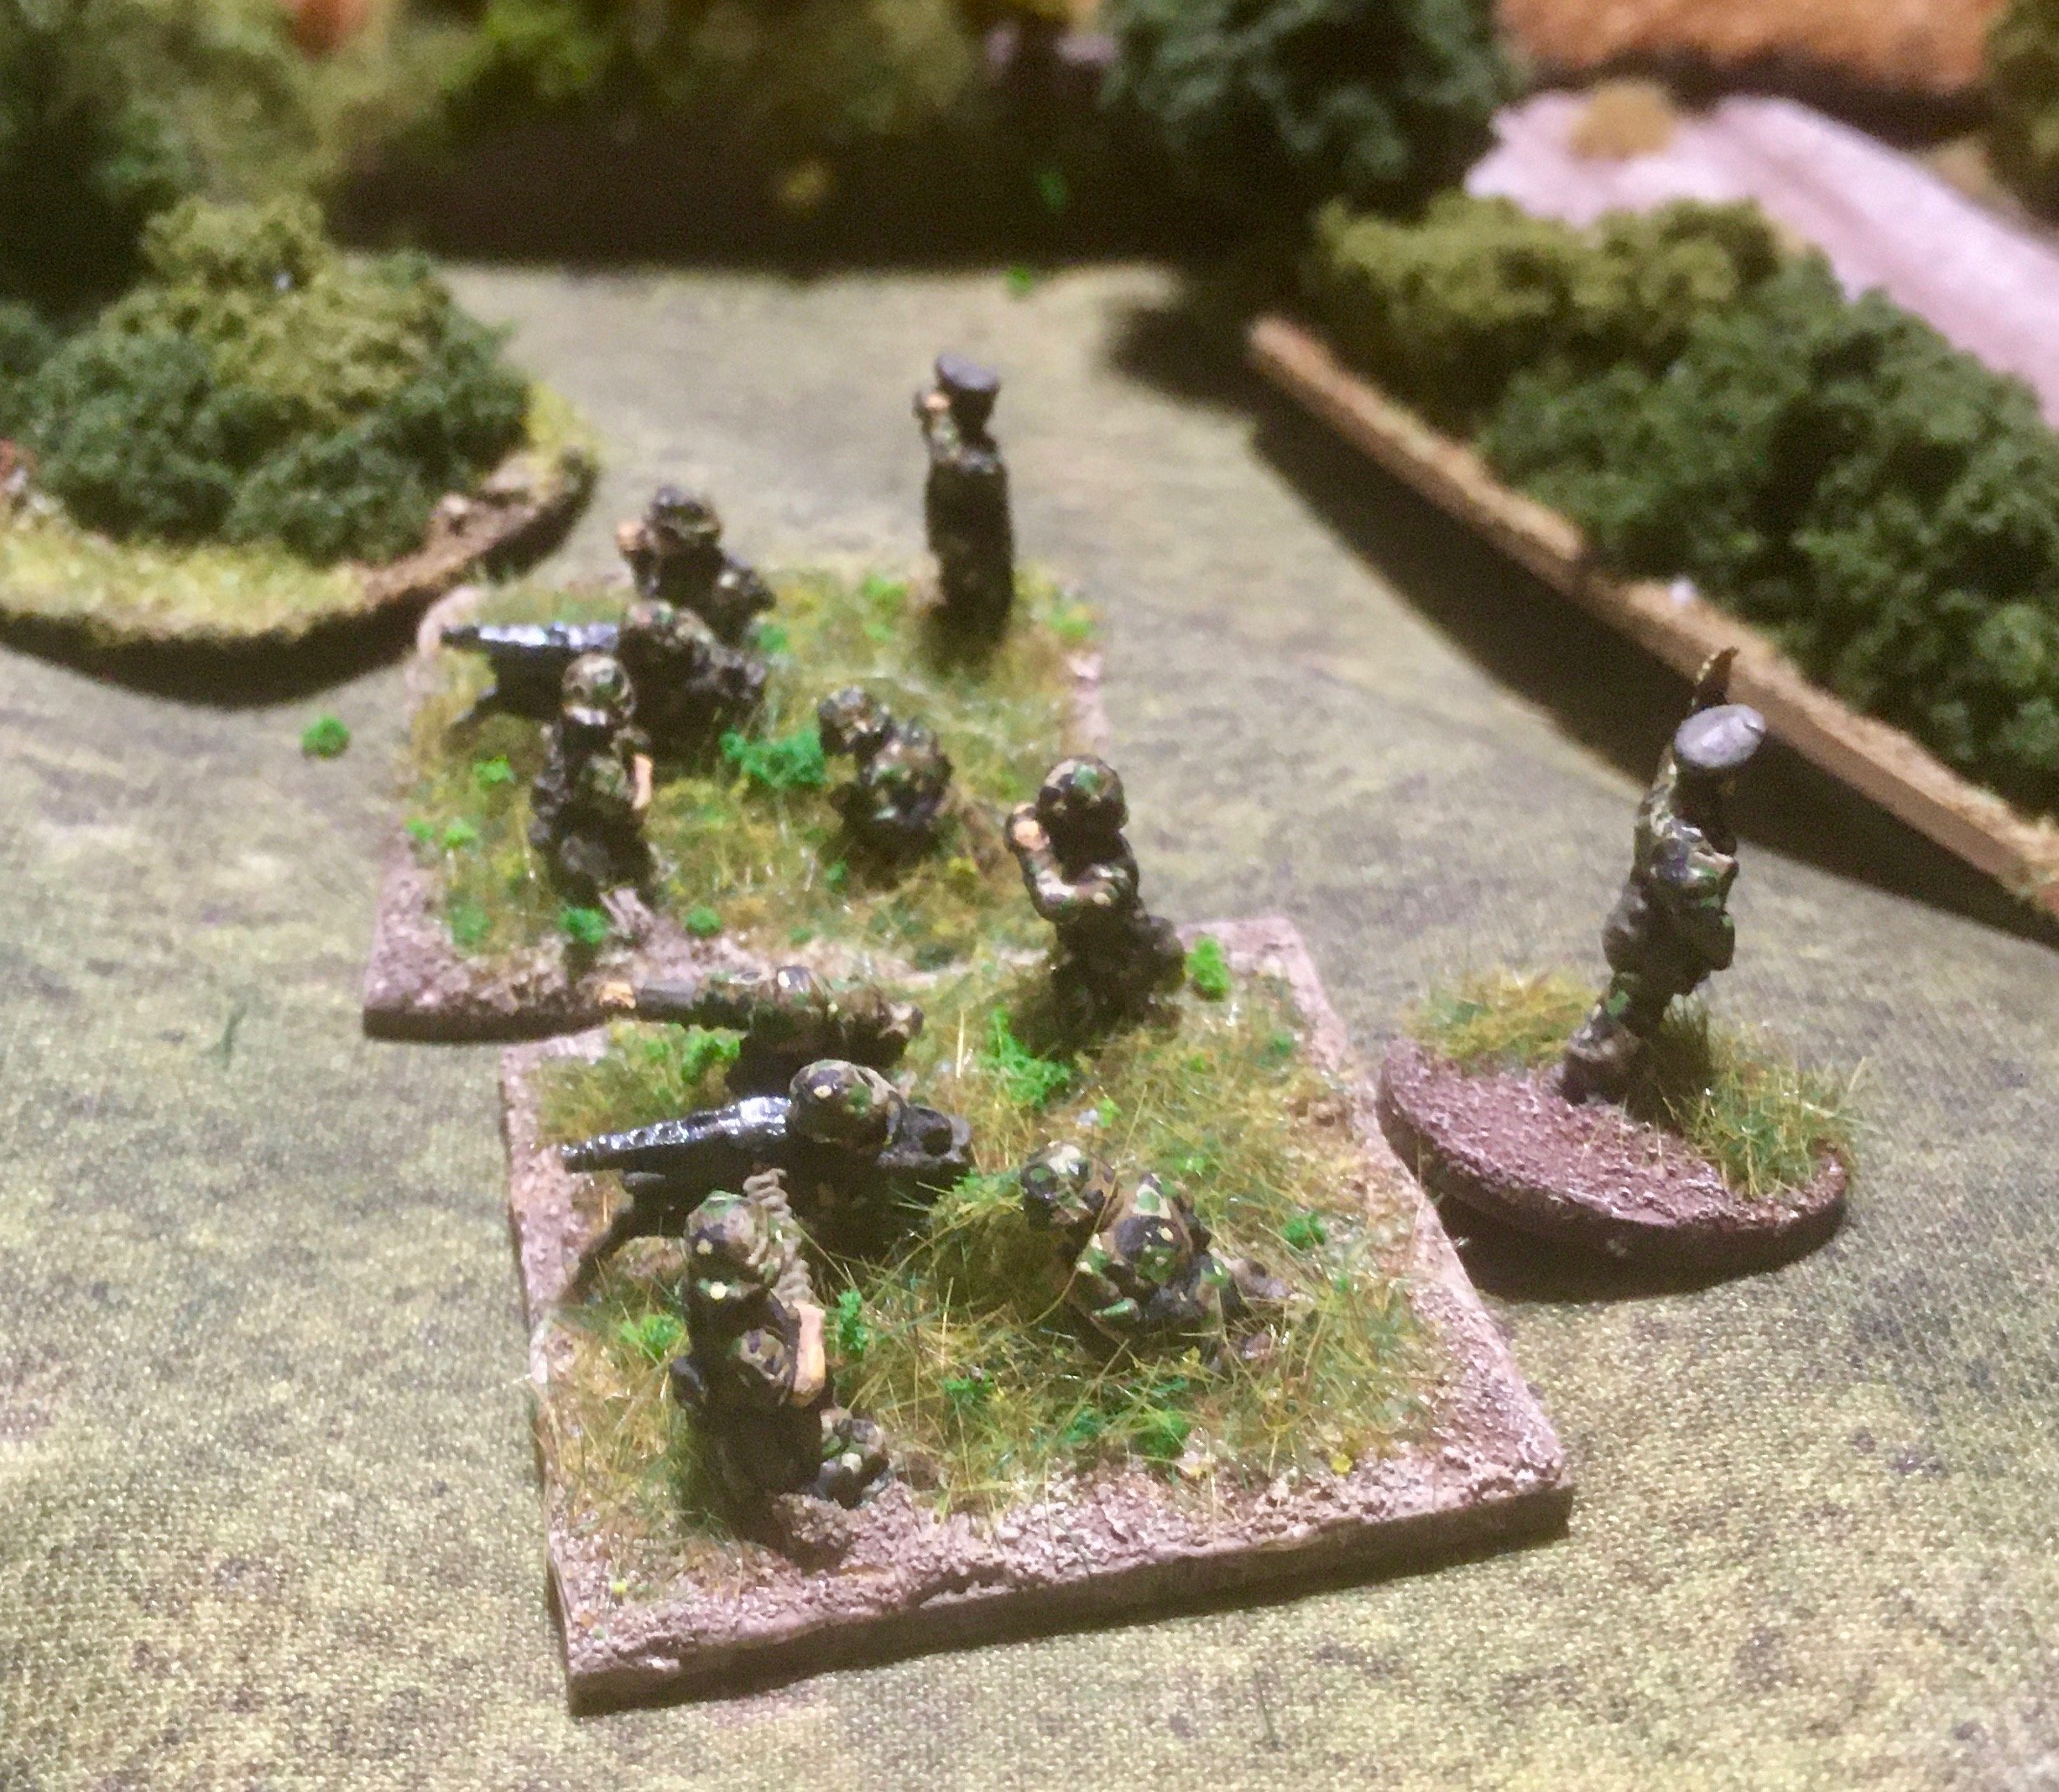 Meanwhile in the centre Das Reich's heavy machine-guns were finally deployed to help dislodge the British infantry blocking the advance on the left...